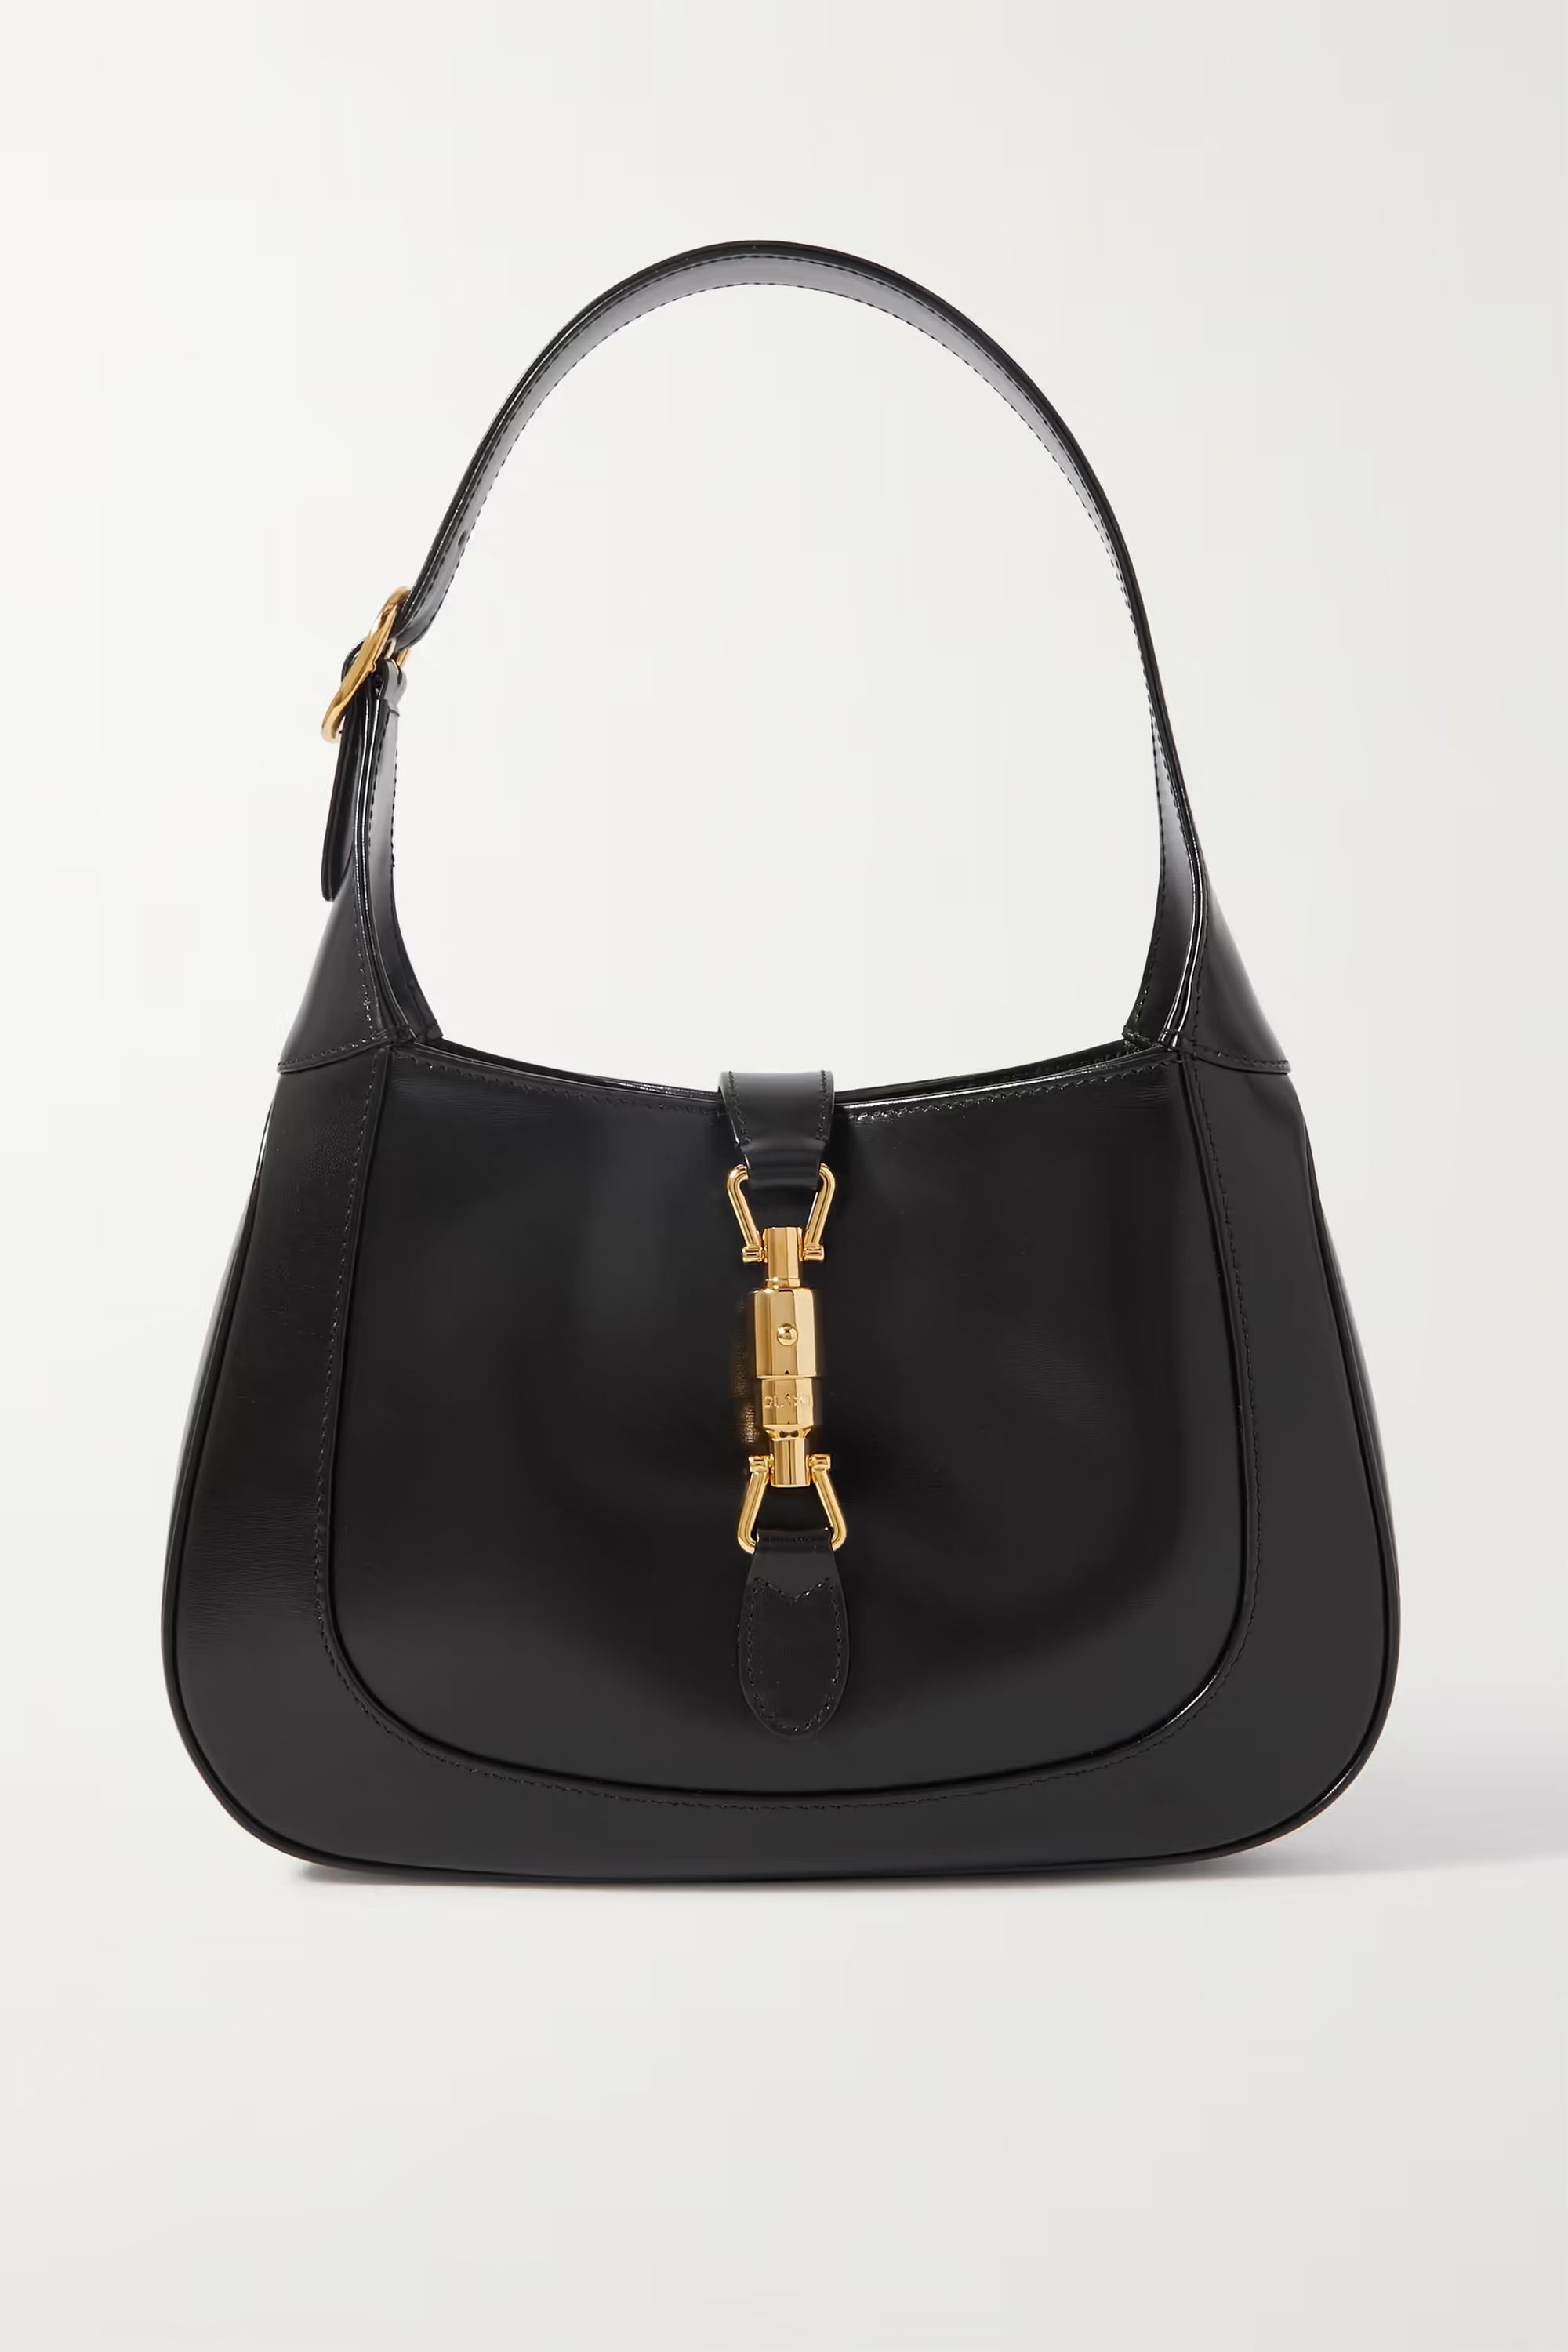 GUCCIJackie 1961 small leather shoulder bag | NET-A-PORTER (US)